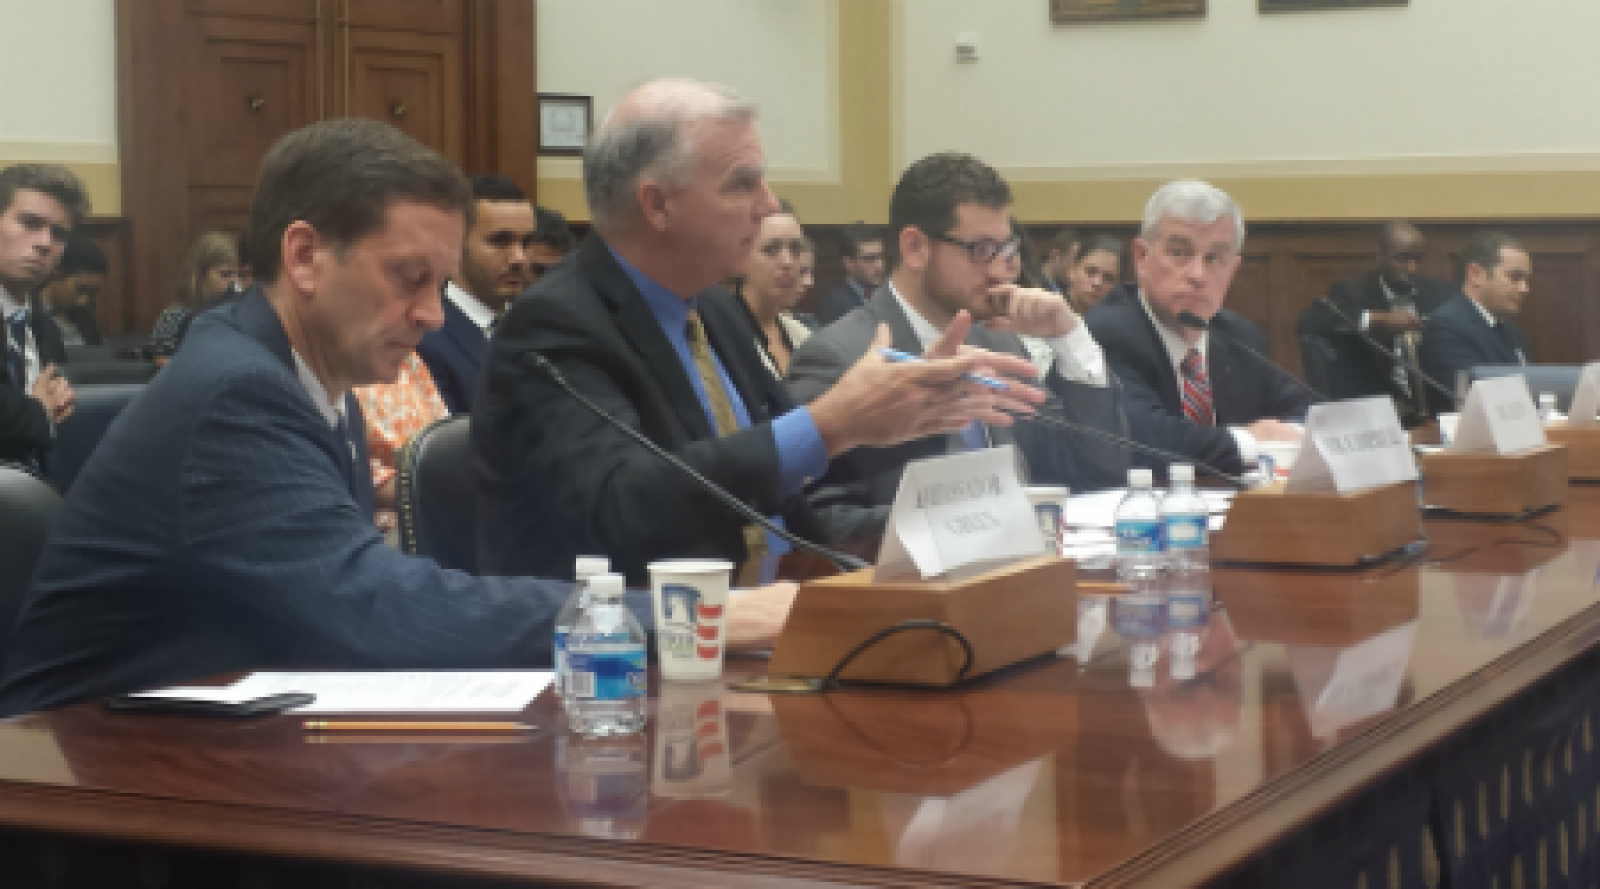 NDI’s Les Campbell Testifies Before Congress on Tunisia’s Democratic Transition